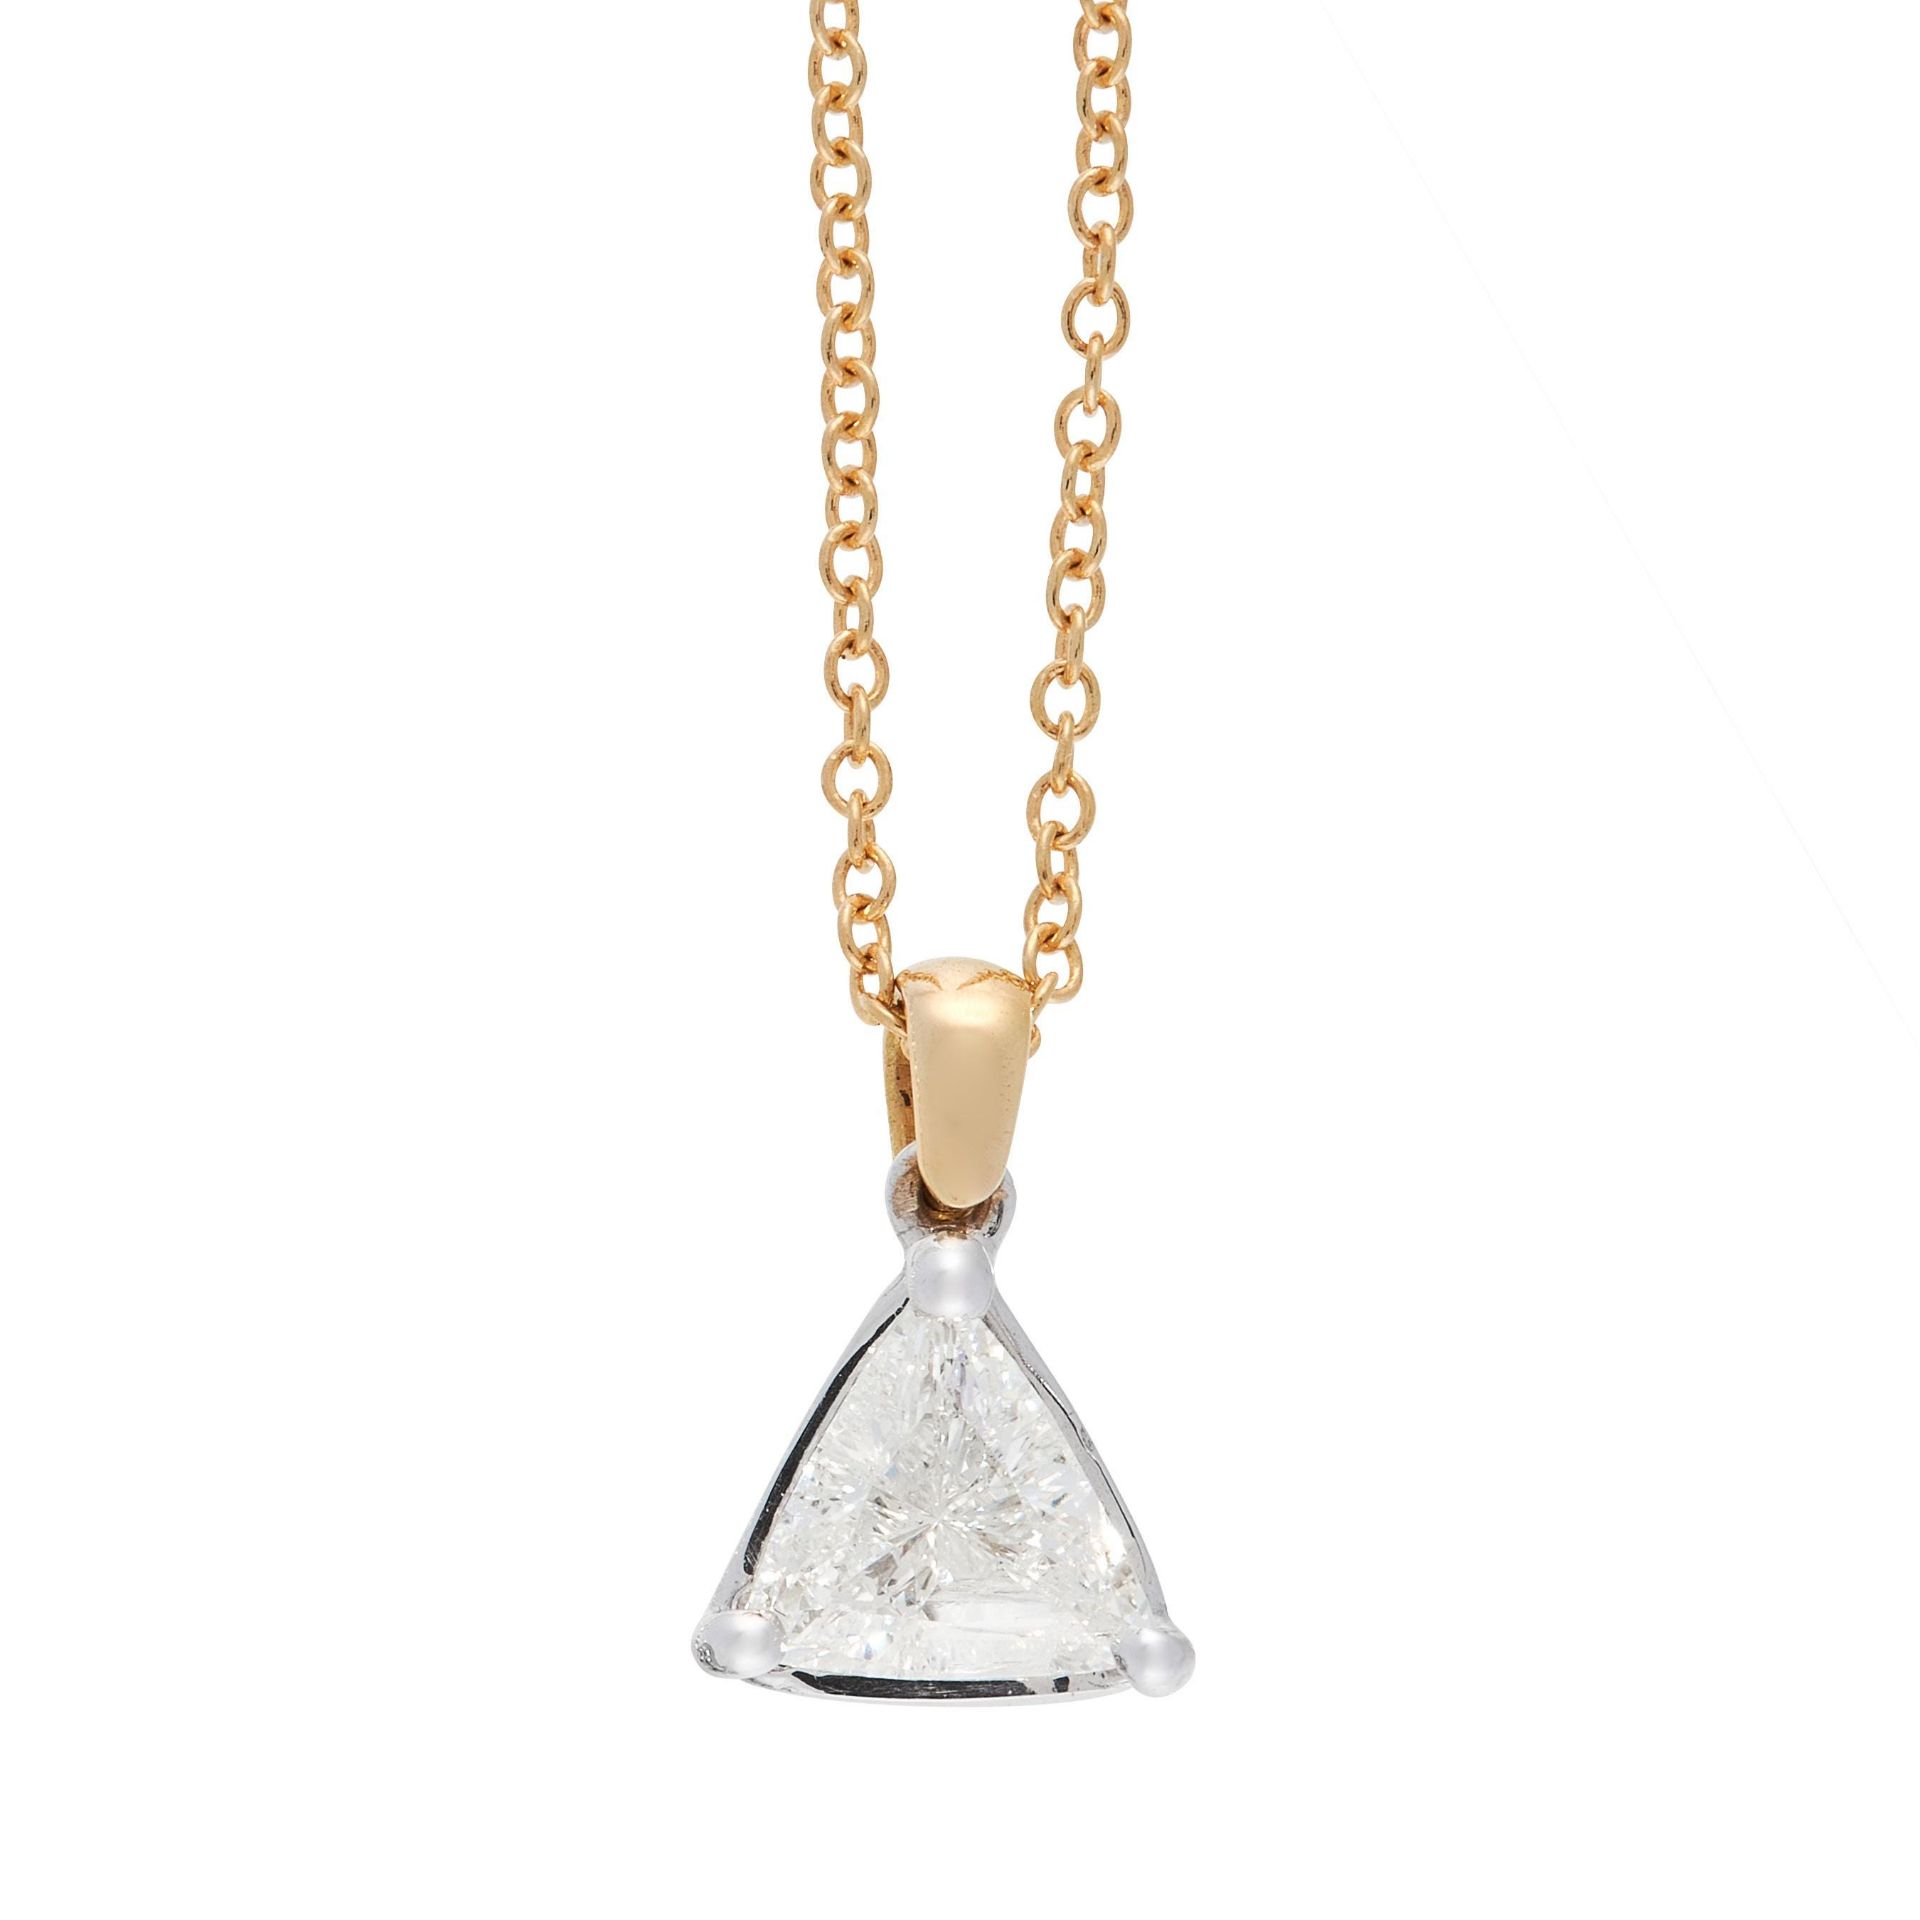 DIAMOND PENDANT AND CHAIN set with a trillion cut diamond of 0.95 carats, stamped 750, pendant 1.